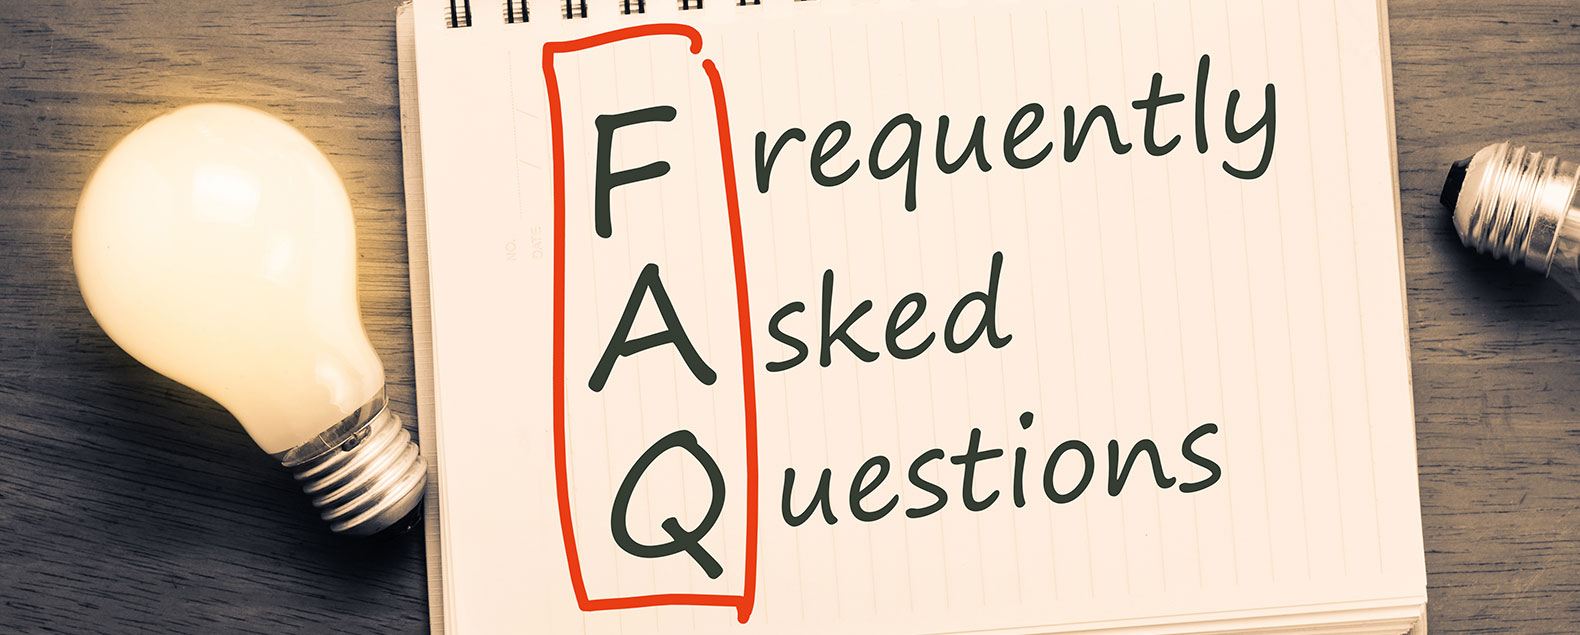 Frequently Asked Questions - New Braunfels